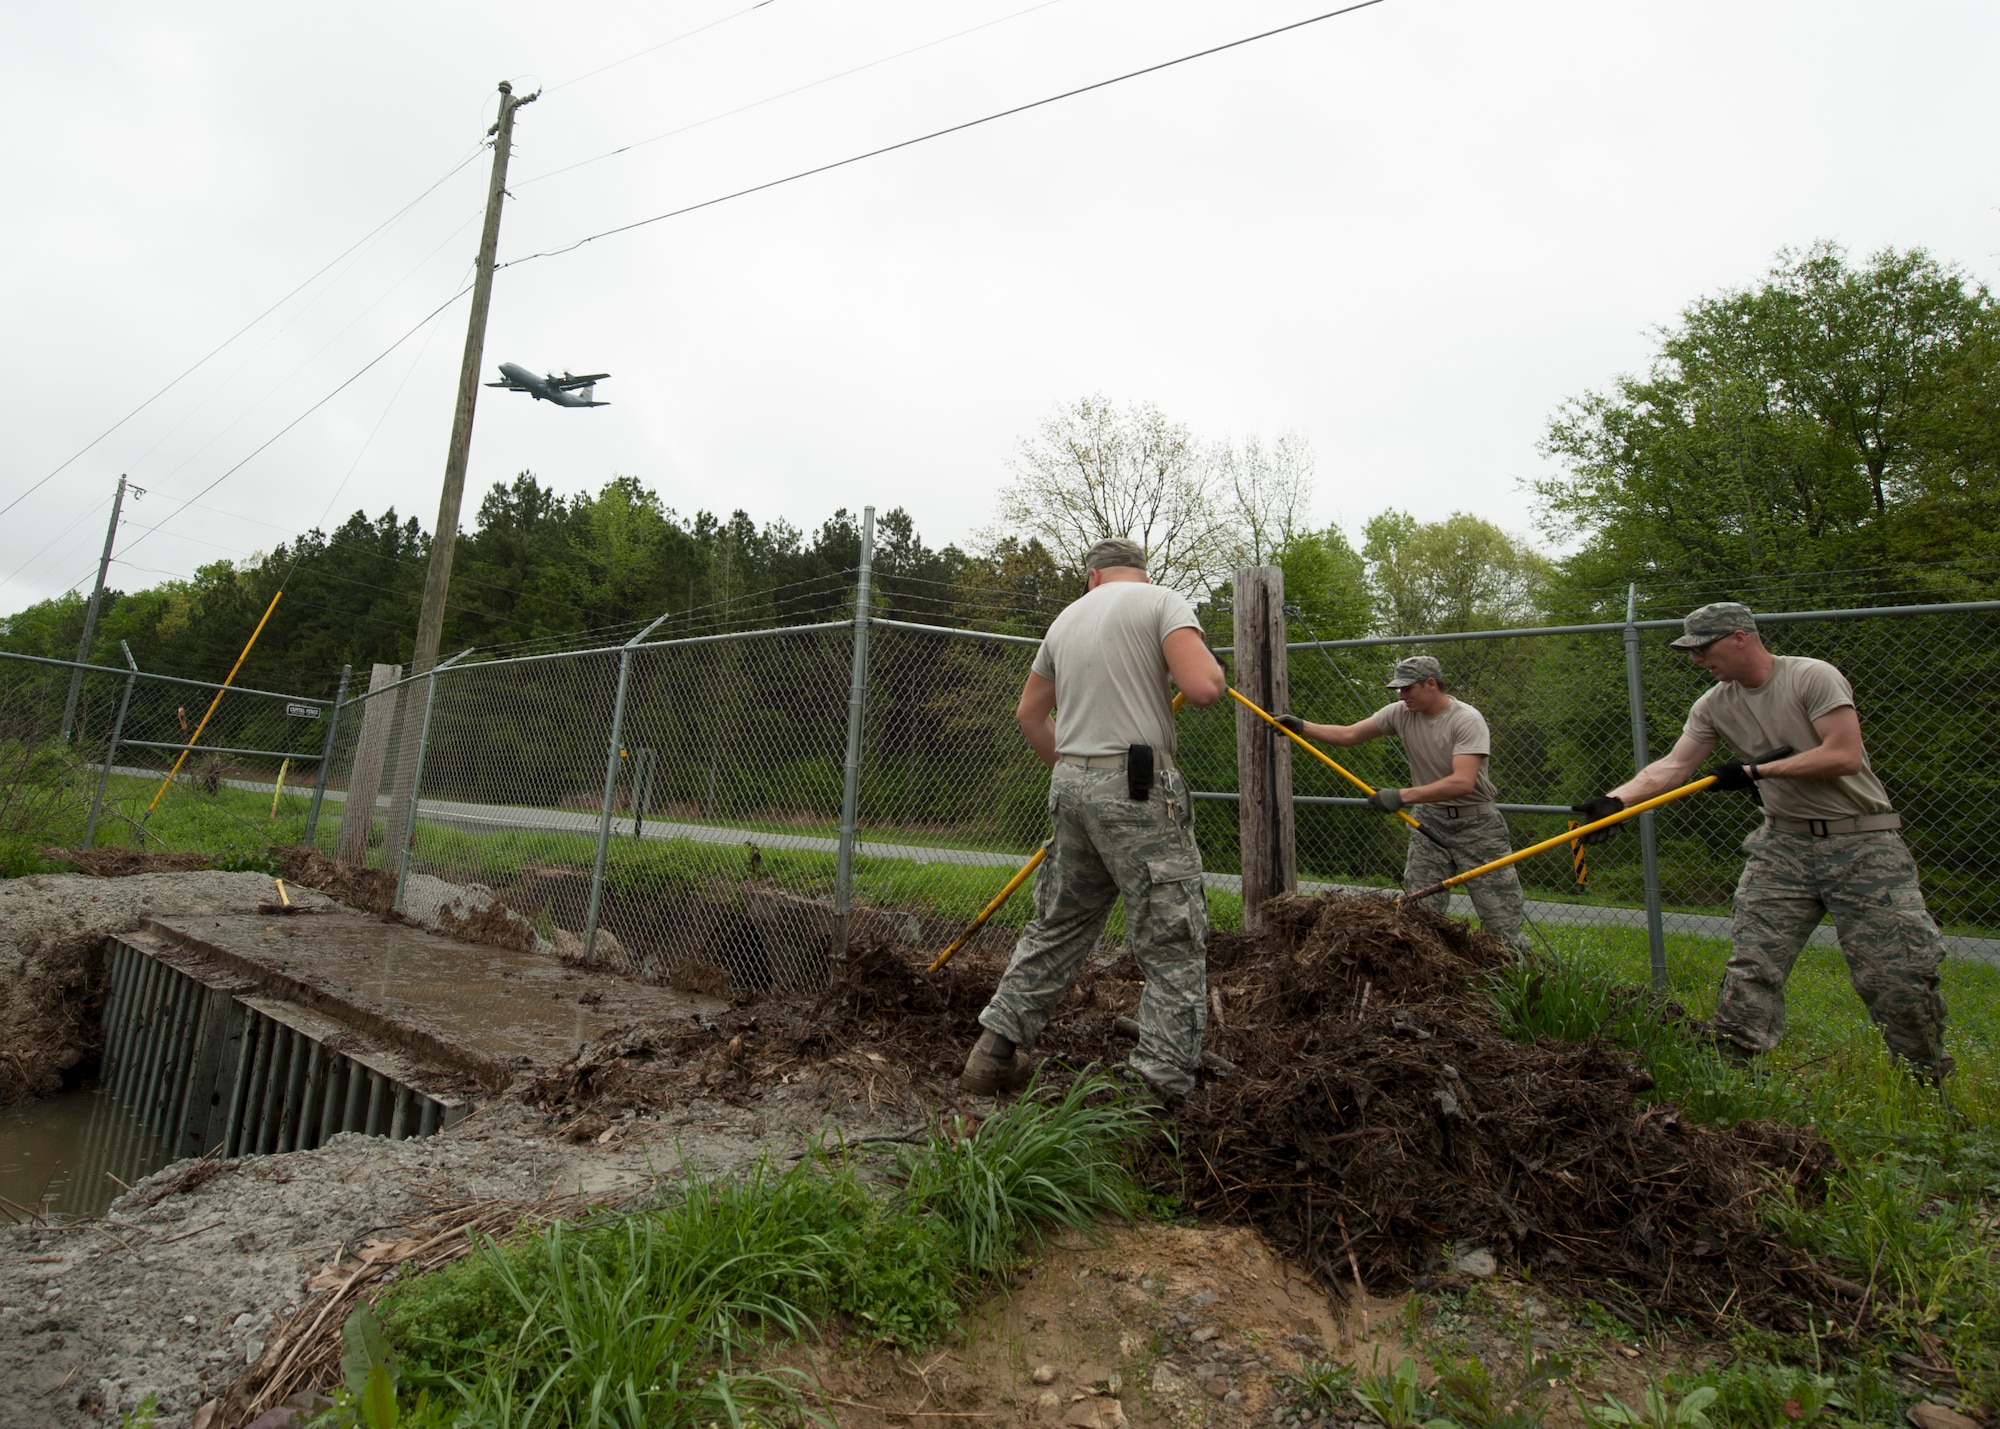 Members from the 19th Civil Engineer Squadron pile debris from a culvert April 13, 2015, at Little Rock Air Force Base, Ark. Constructing and maintaining drainage systems on base are also responsibilities of the “Dirt Boyz”. (U.S. Air Force photo by Airman 1st Class Scott Poe)   